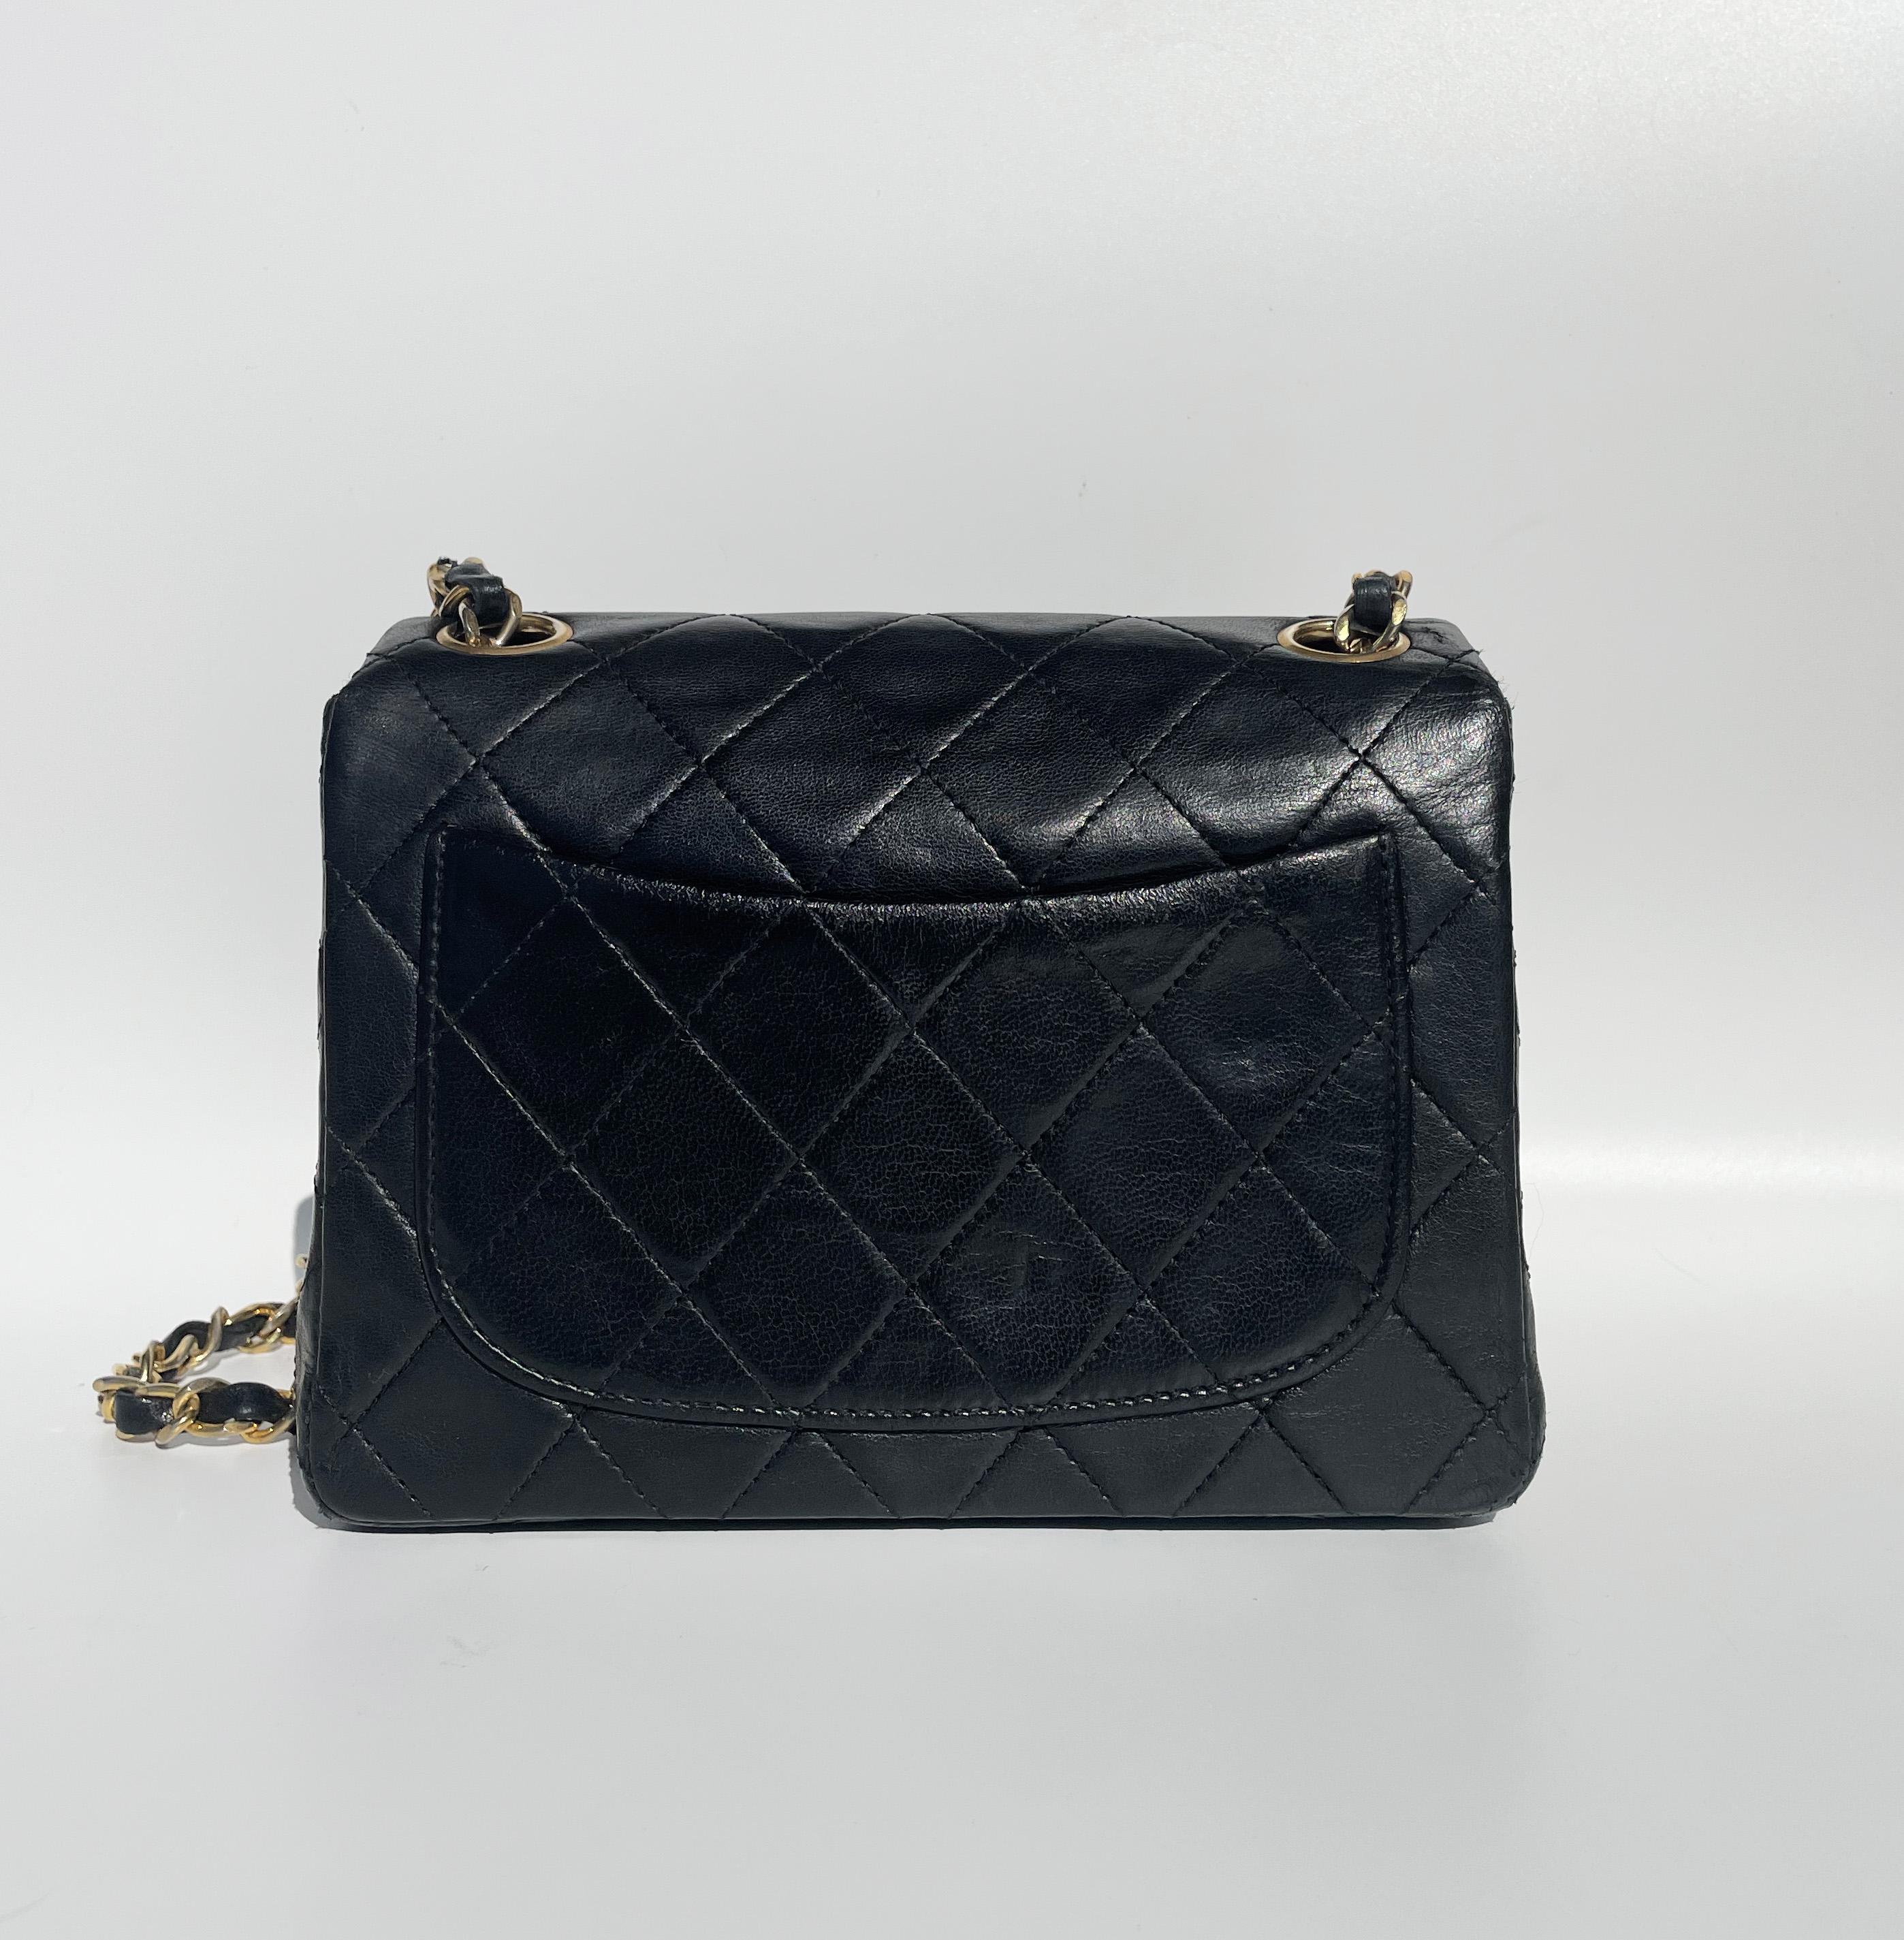 Classic Chanel Mini Timeless handbag in black quilted leather For Sale 4